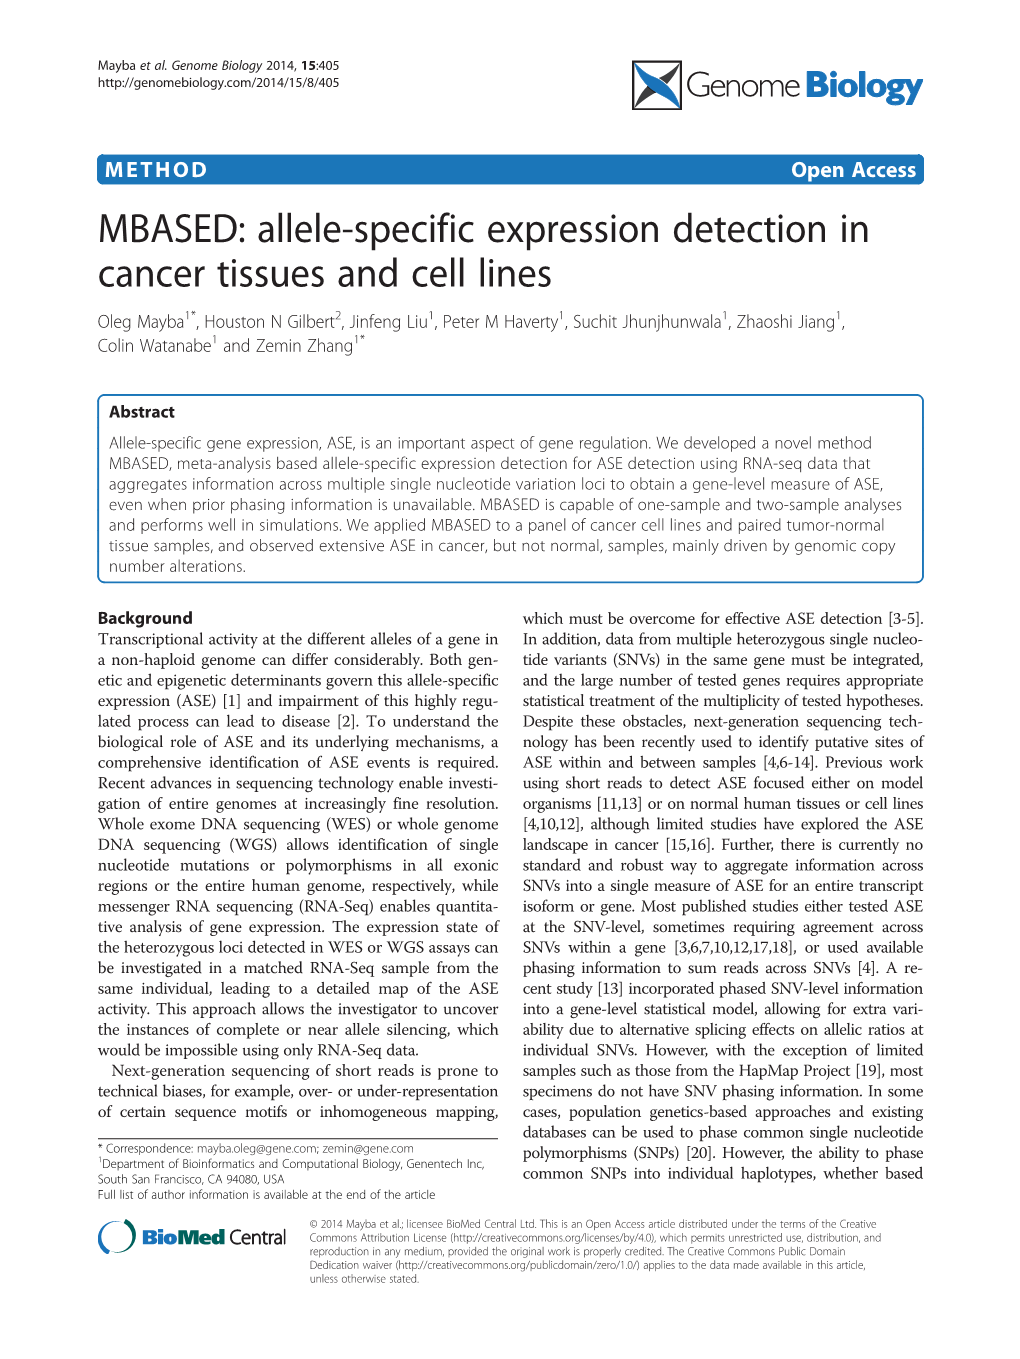 Allele-Specific Expression Detection in Cancer Tissues and Cell Lines